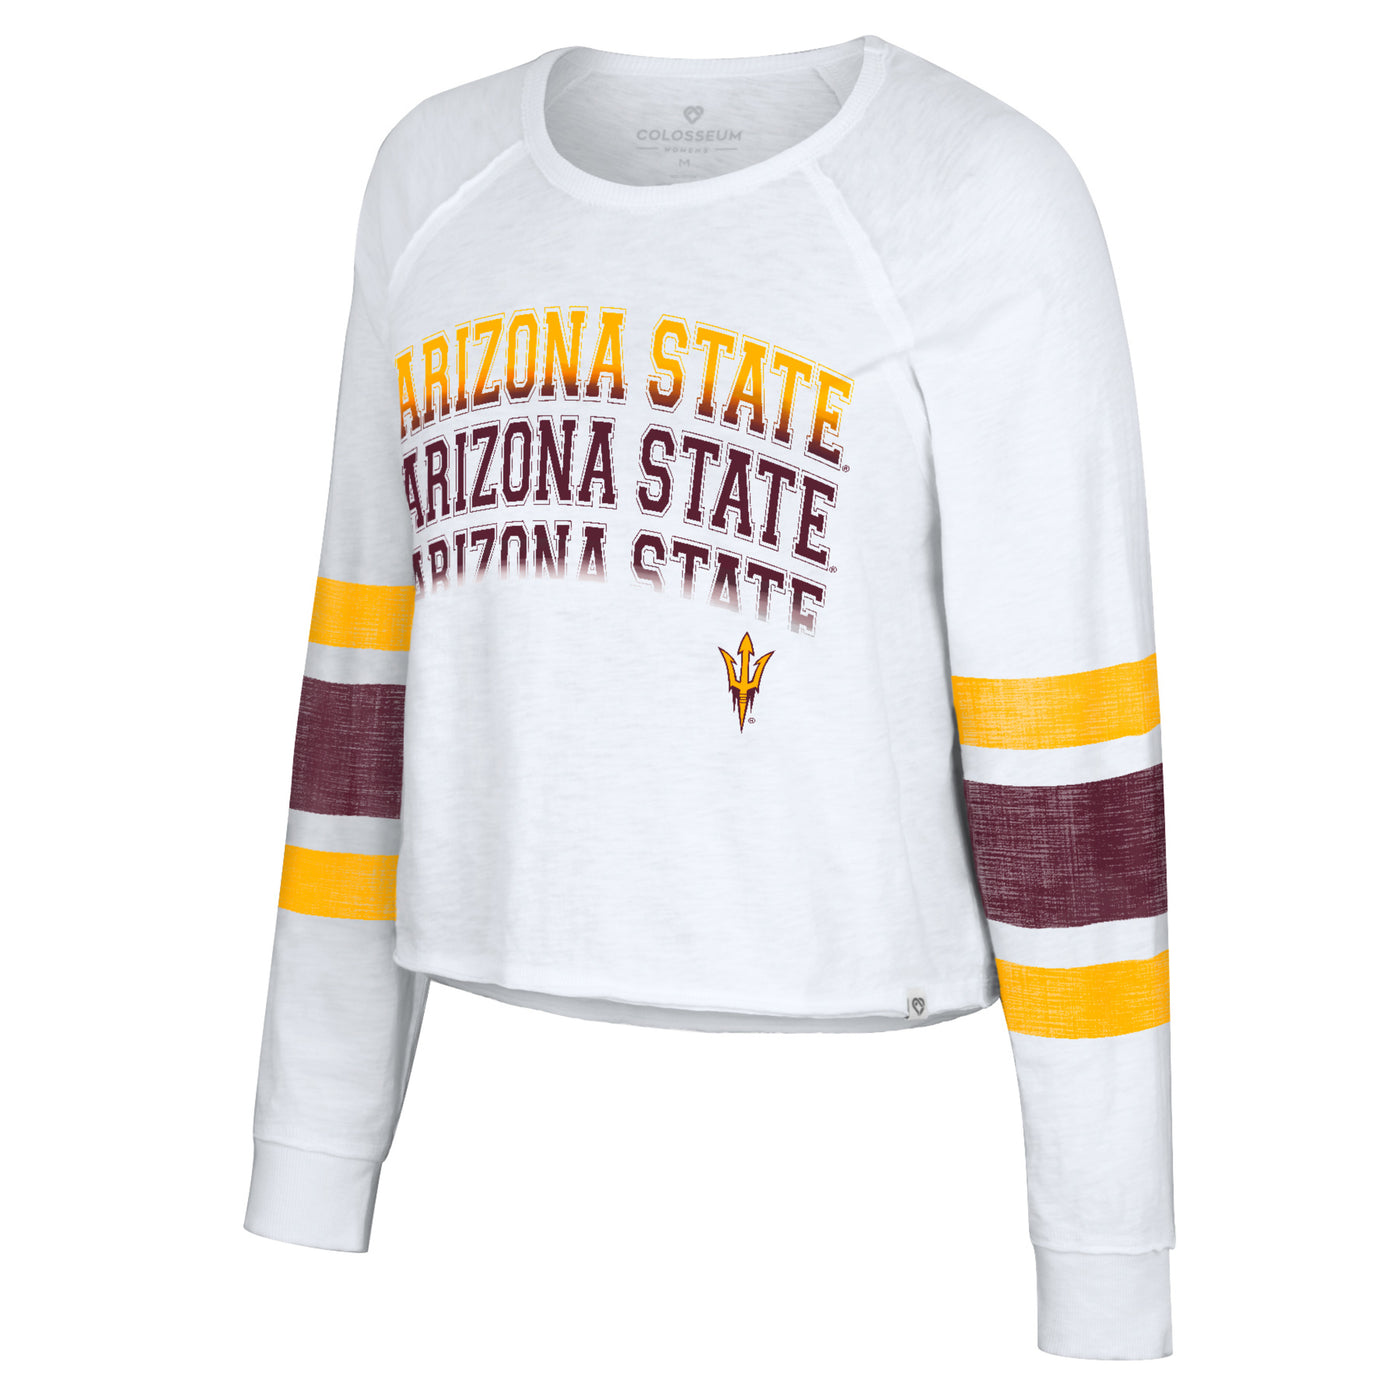 ASU white long sleeve crop top with 3 maroon and gold stripes on each arm and 'Arizona State' repeating down the front, above the pitchfork